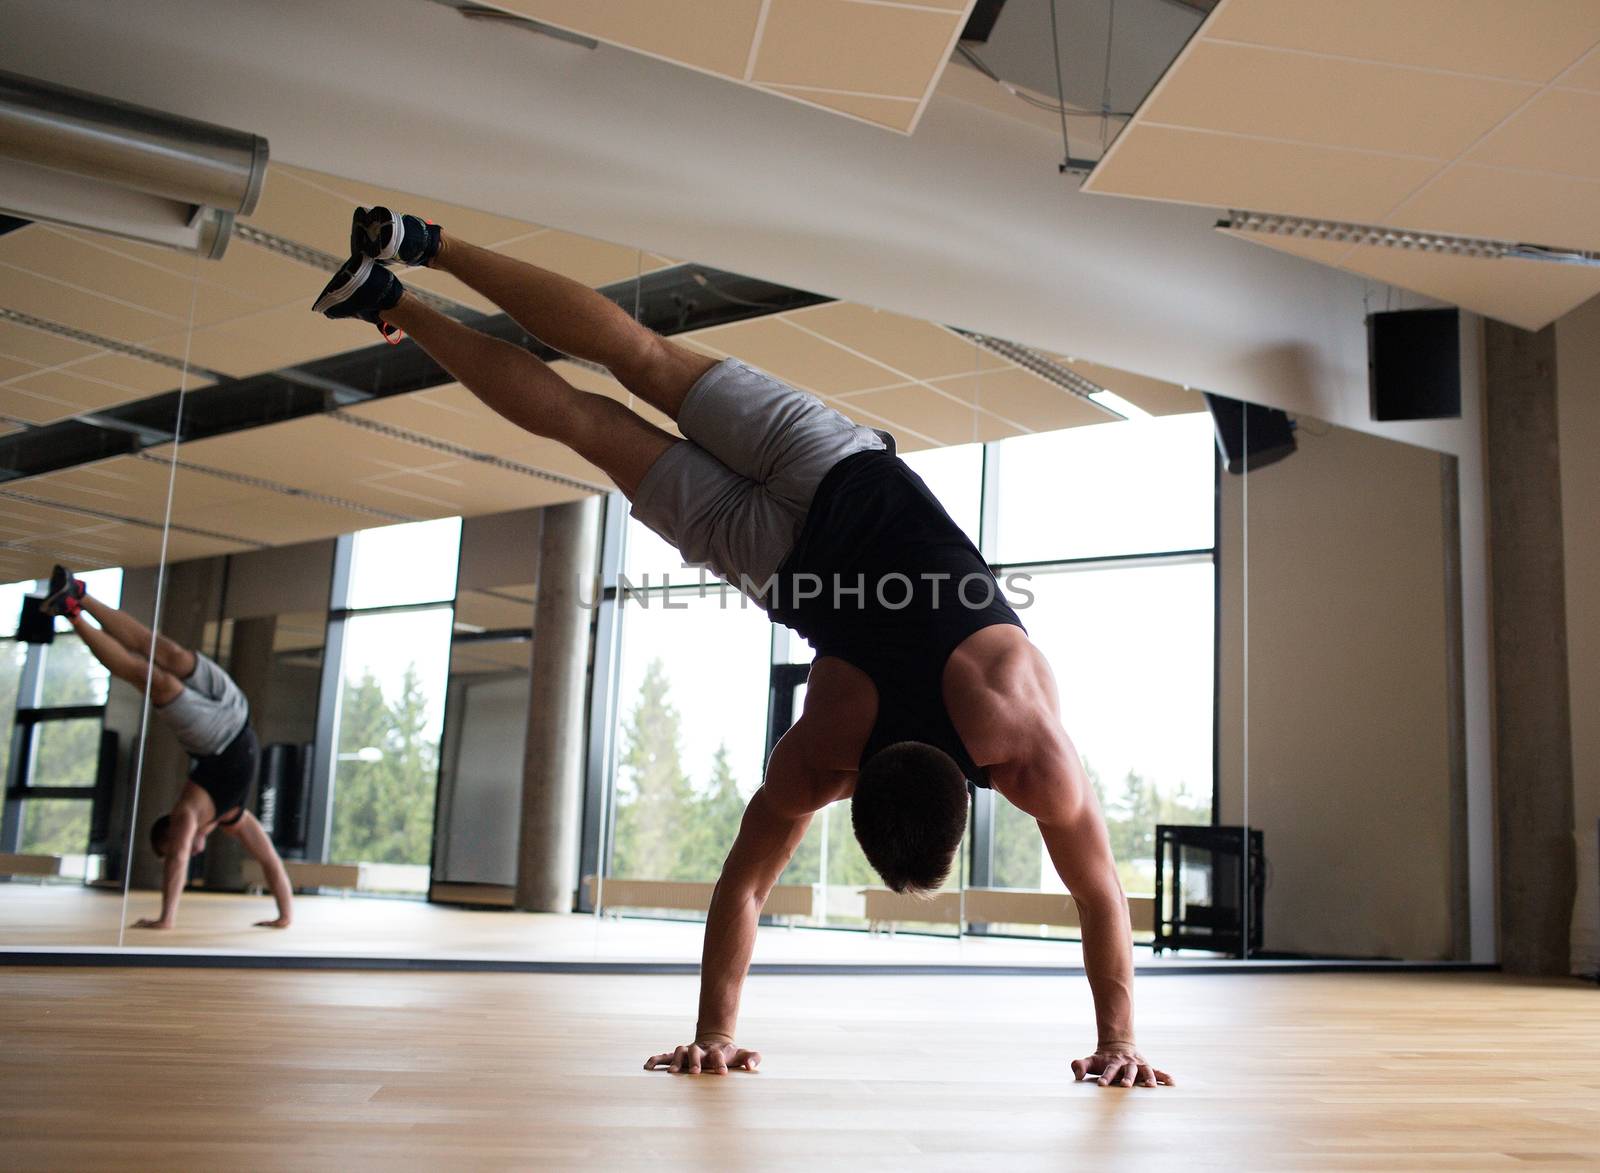 sport, fitness, lifestyle and people concept - man exercising in gym